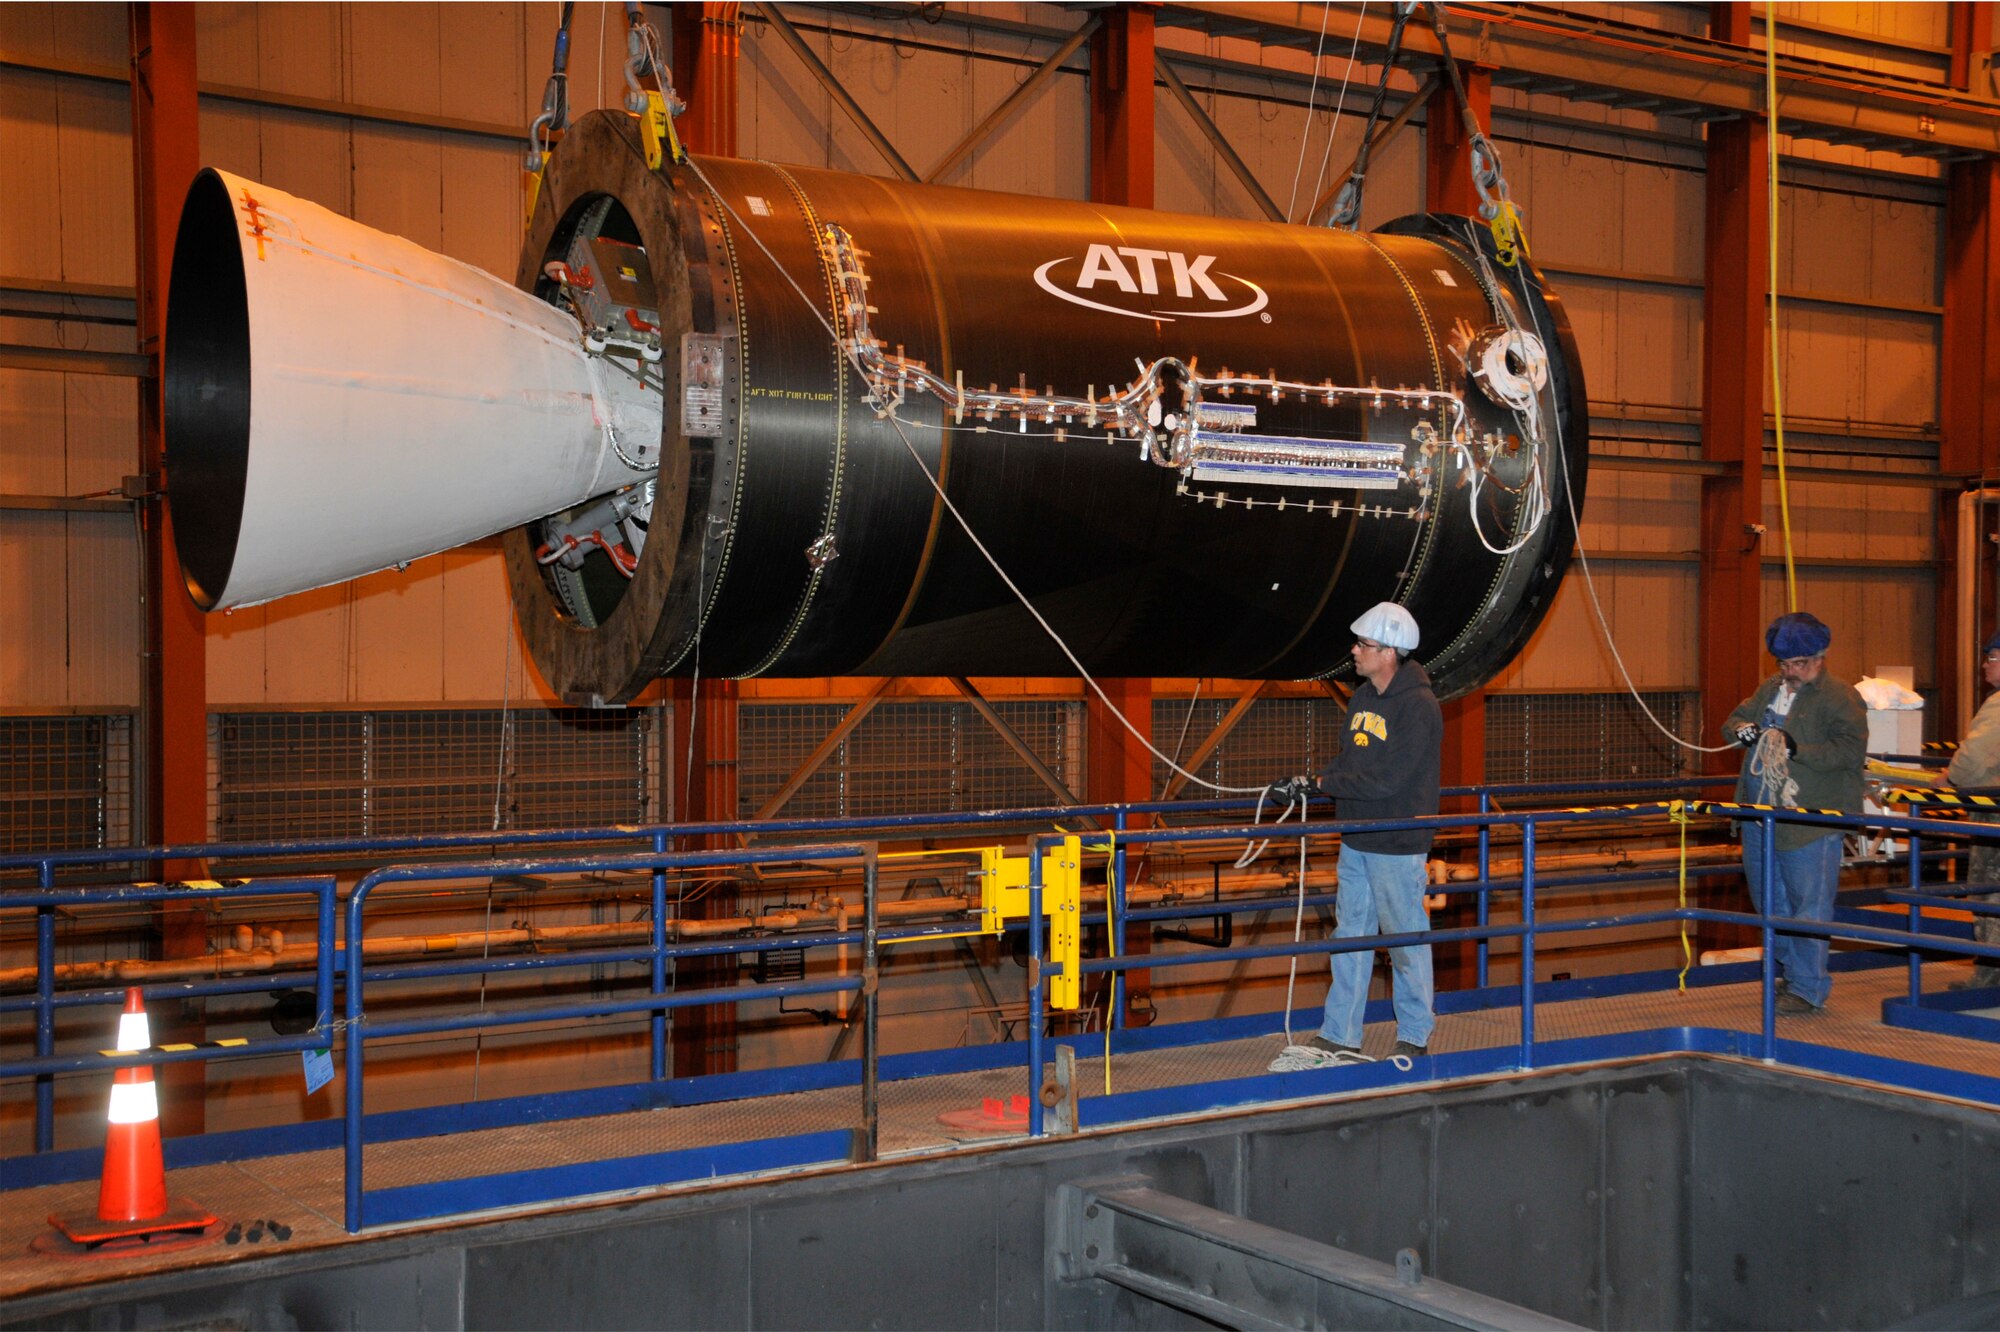 From left, AEDC’s Mike Mills, an outside machinist, David Amonette, a boilermaker, and Barry Long, an electrician, position the ATK CASTOR® 30XL rocket motor into place for simulated altitude static testing at AEDC’s J-6 Large Rocket Motor Testing facility. (Photo by Rick Goodfriend)